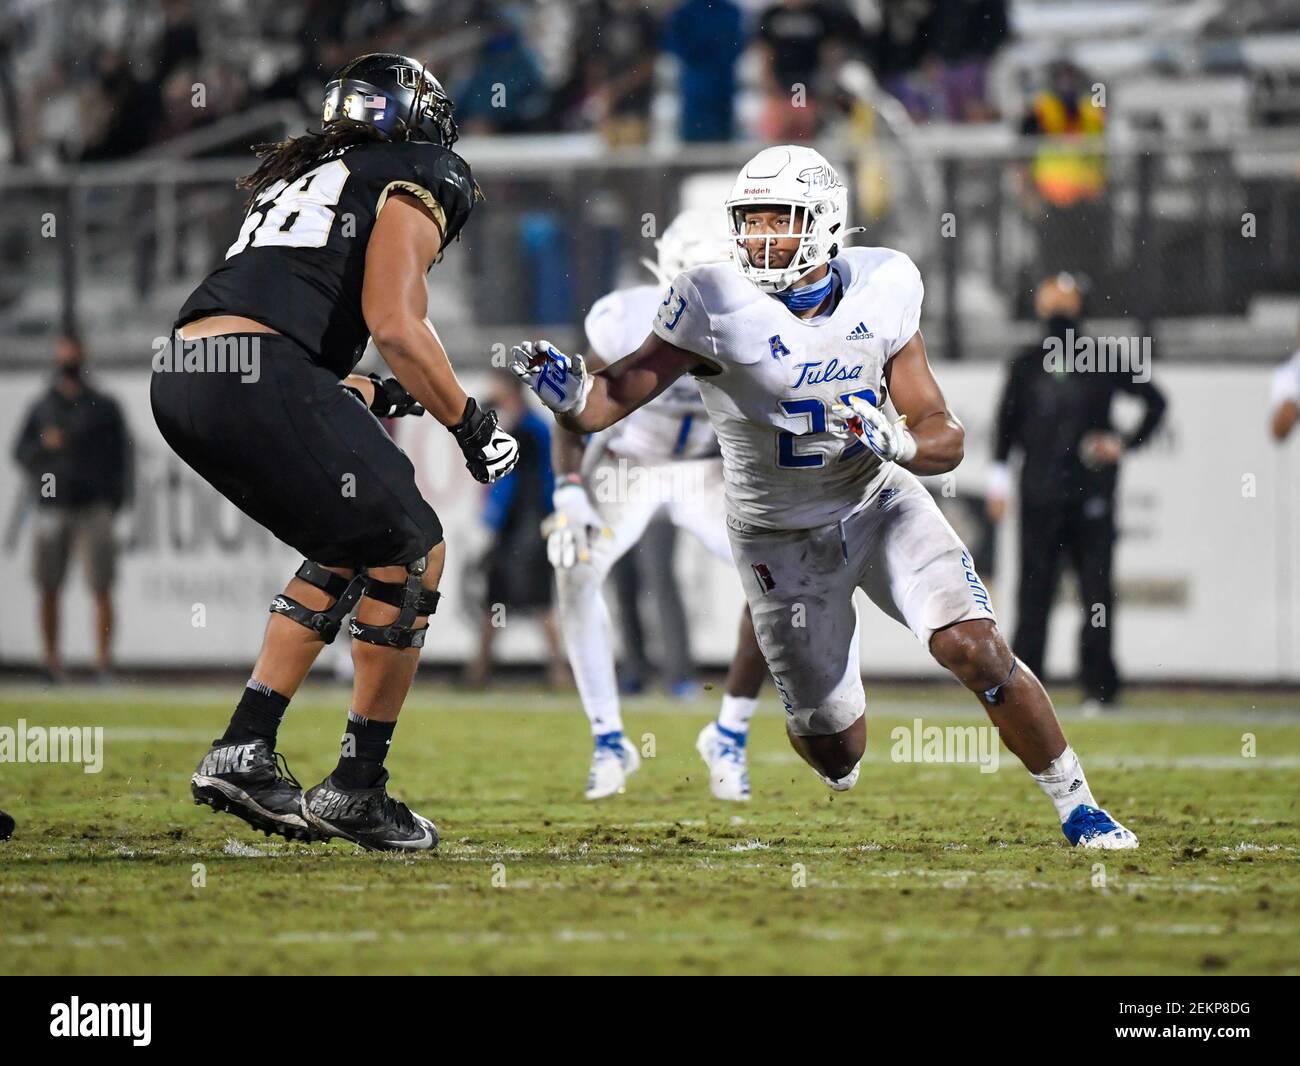 October 3, 2020 - Orlando, FL, U.S: UCF Knights offensive lineman Marcus Tatum (68) attempts to blocks the rush of Tulsa Golden Hurricane linebacker Zaven Collins (23) during 2nd half NCAA football game between the Tulsa Golden Hurricane and the UCF Knights. Tulsa defeated UCF 34-26 at the Bounce House in Orlando, Fl. Romeo T Guzman/Cal Sport Media/Sipa USA(Photo by Romeo Guzman/CSM/Sipa USA) Stock Photo